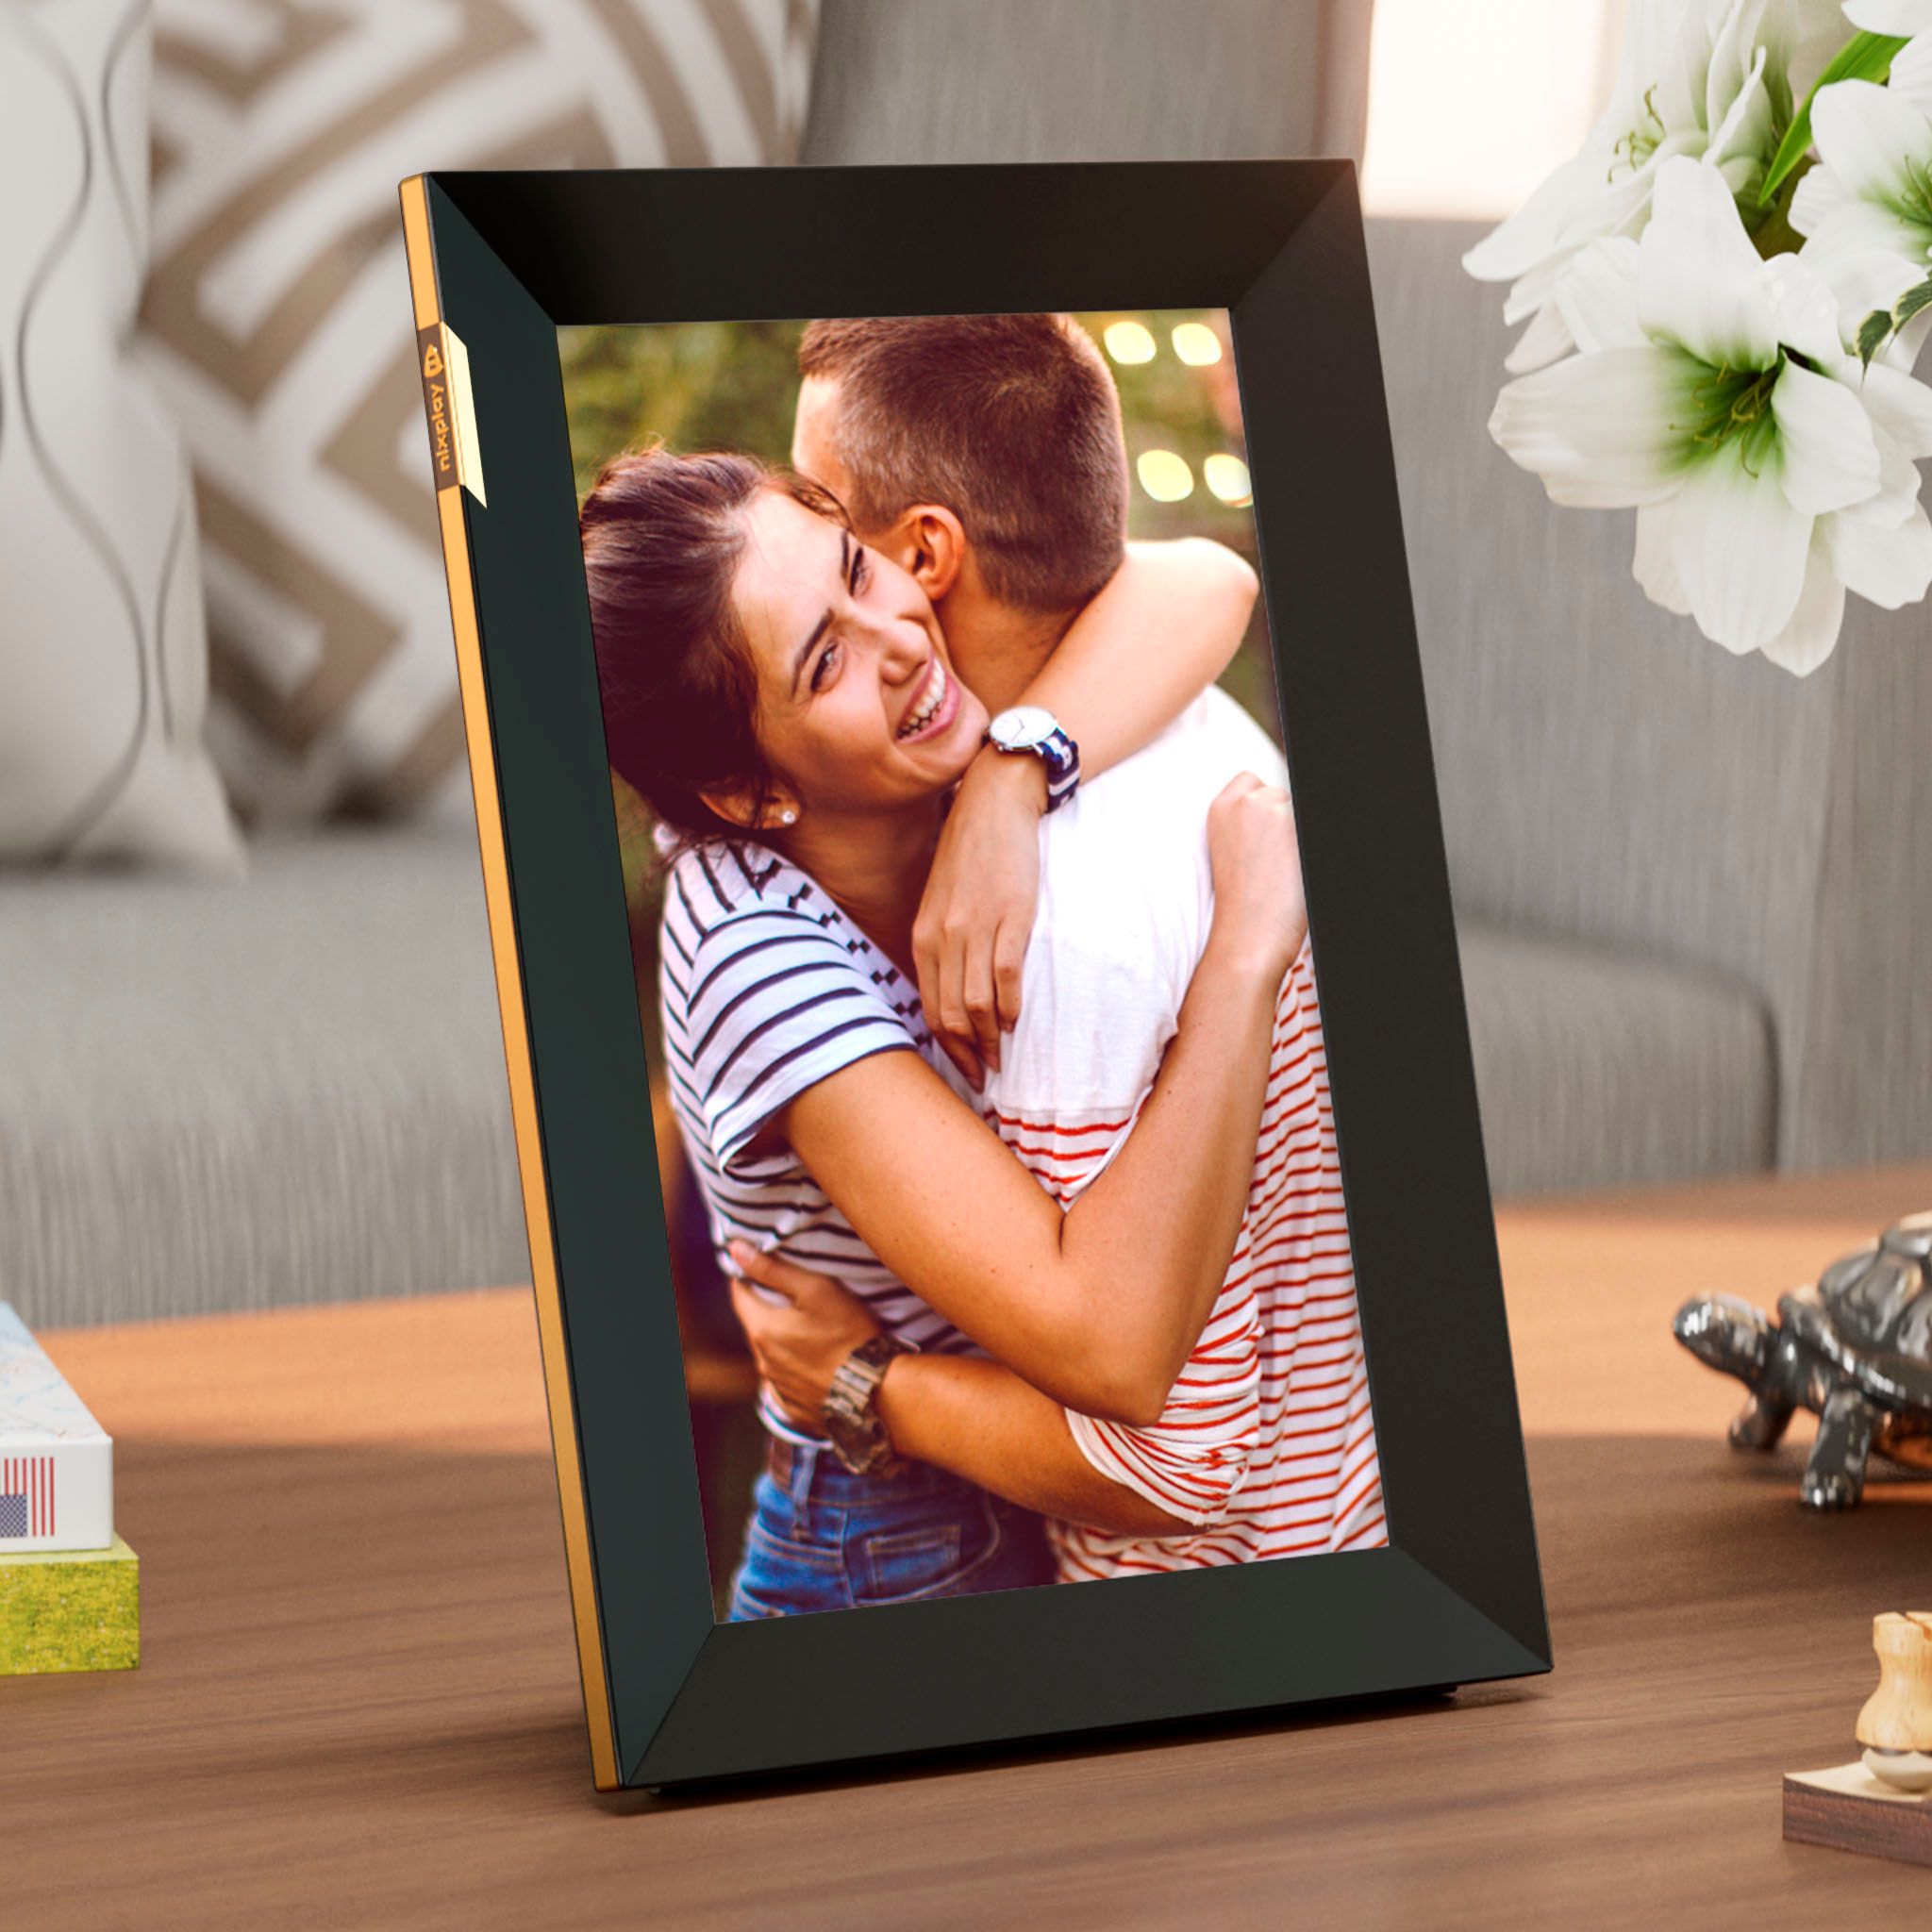 Nixplay 10.1 inch Touch Screen Smart Digital Picture Frame with WiFi (W10P)  Black Classic Matte Share Photos and Videos Instantly via Email or 